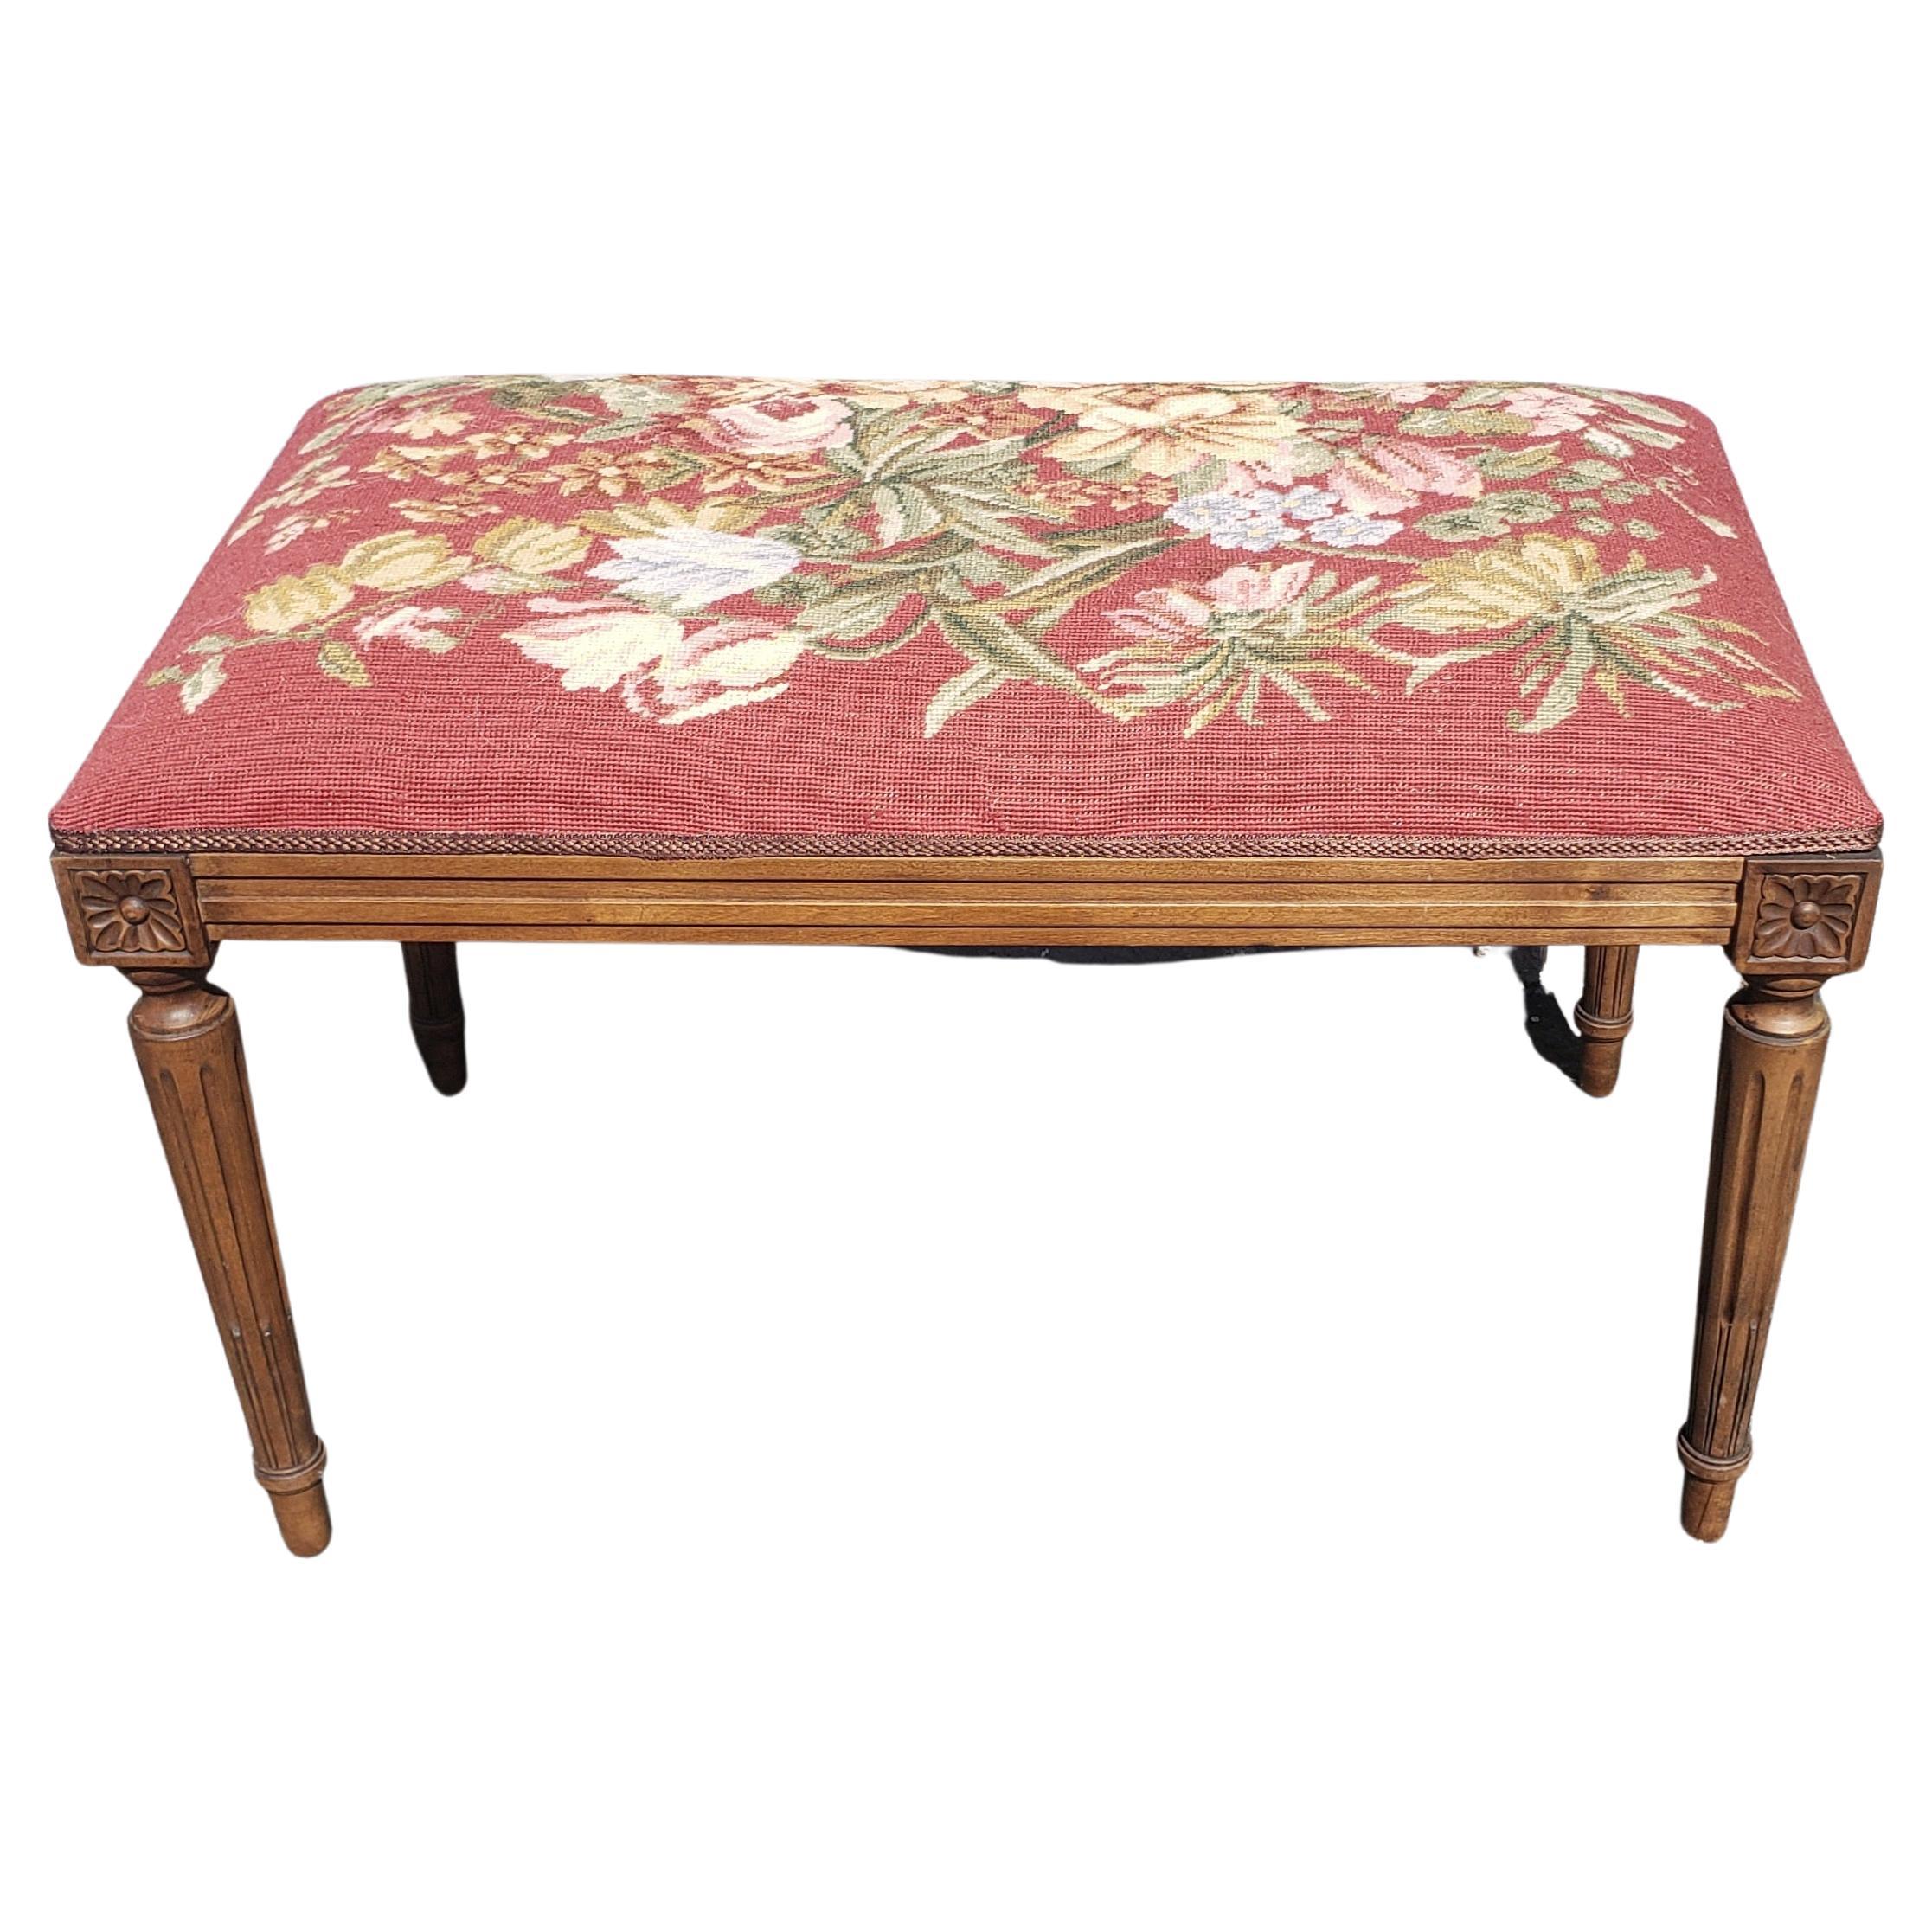 Louis XVI Style Walnut and Needlepoint Upholstered Tabouret Bench For Sale